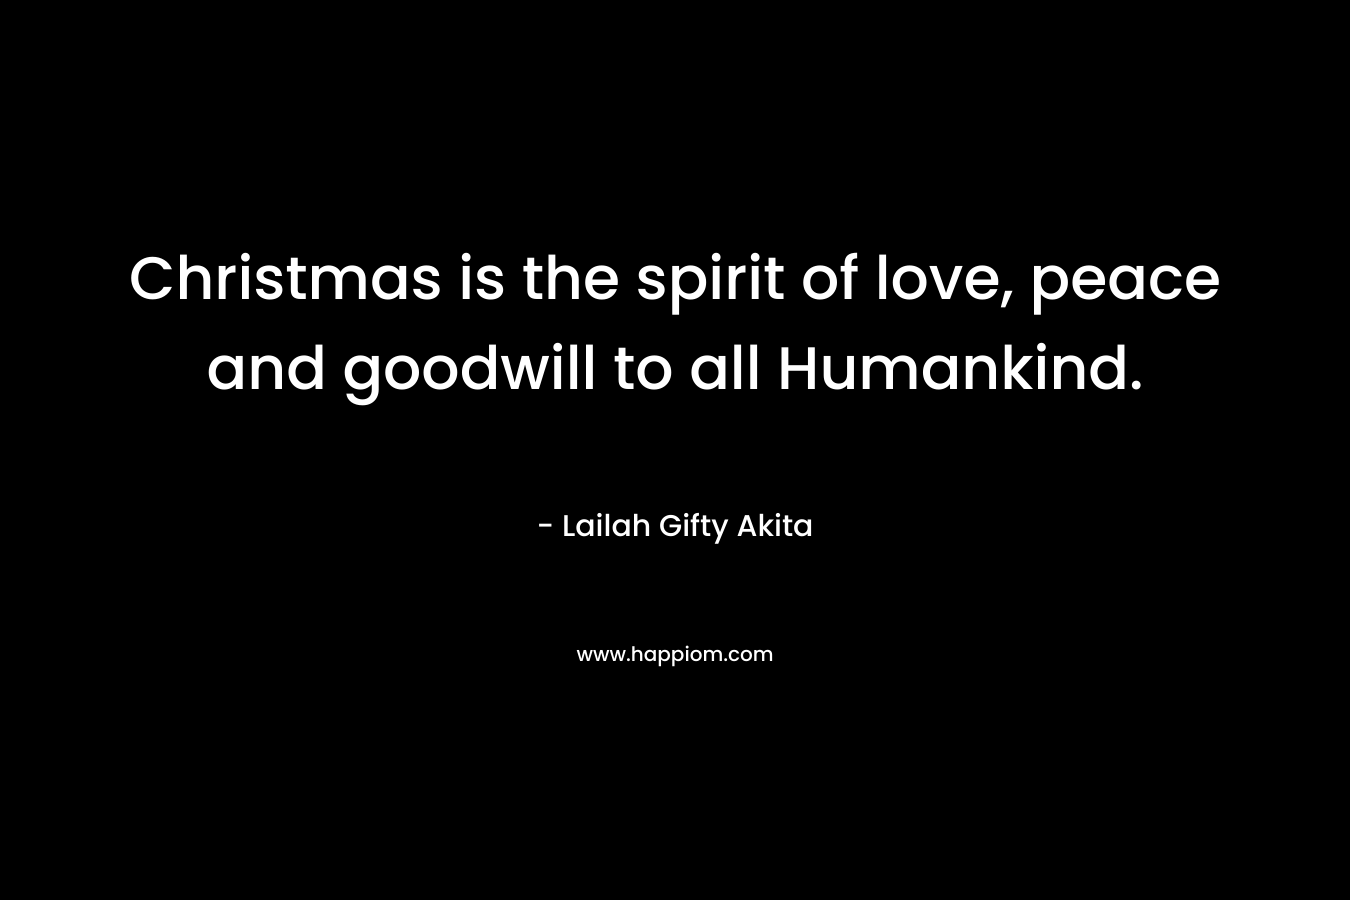 Christmas is the spirit of love, peace and goodwill to all Humankind.